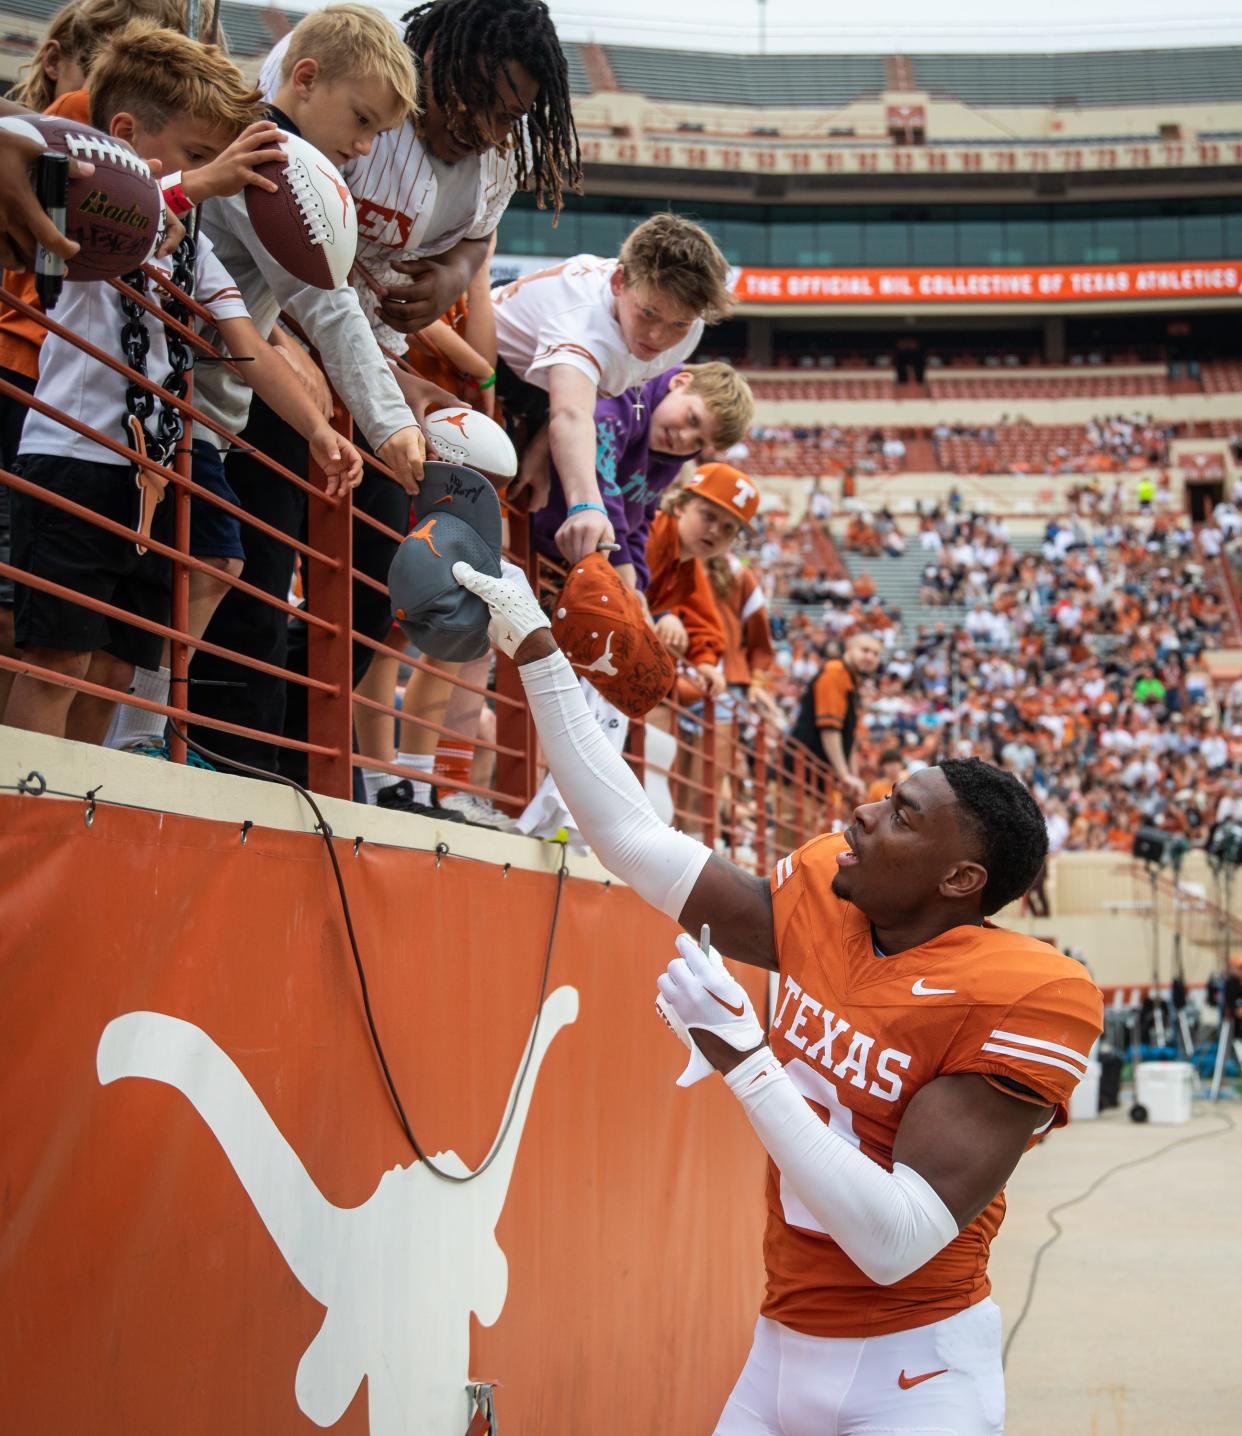 Texas defensive back Terrance Brooks signs autographs for fans during Saturday's Orange-White spring game at Royal-Memorial Stadium. Three days later, he announced that he's entering the transfer portal. Brooks started 13 games last season.